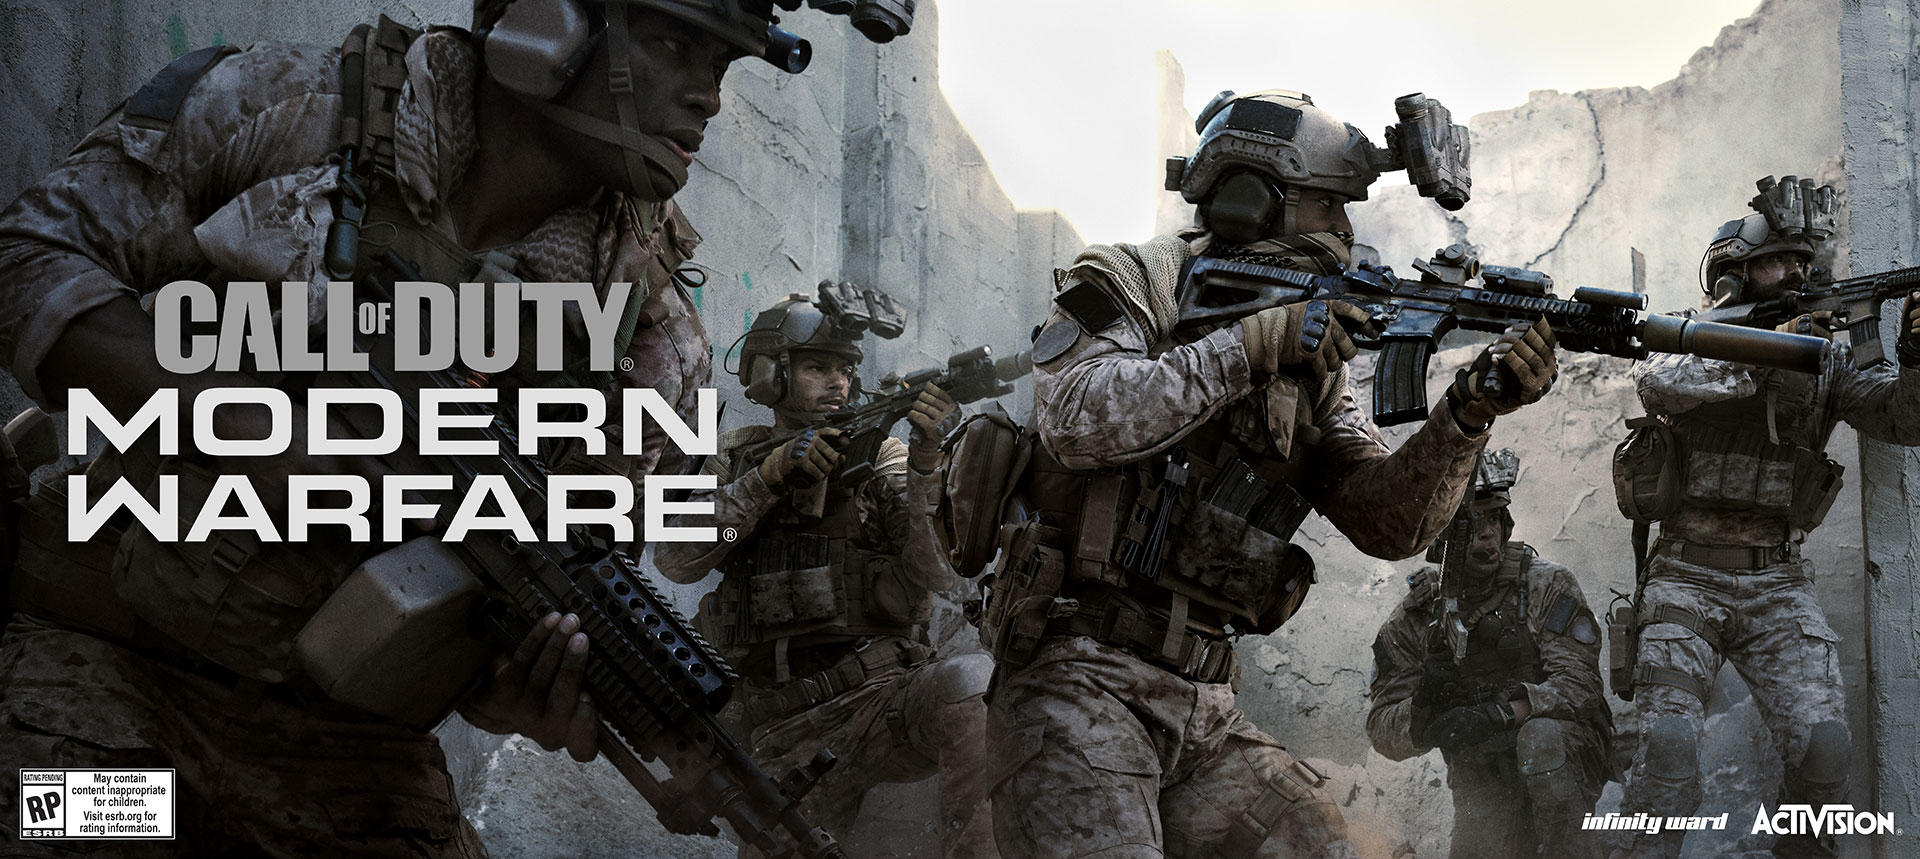 Infinity Ward Lists Call of Duty: Modern Warfare System Requirements Ahead Of October 25th Release